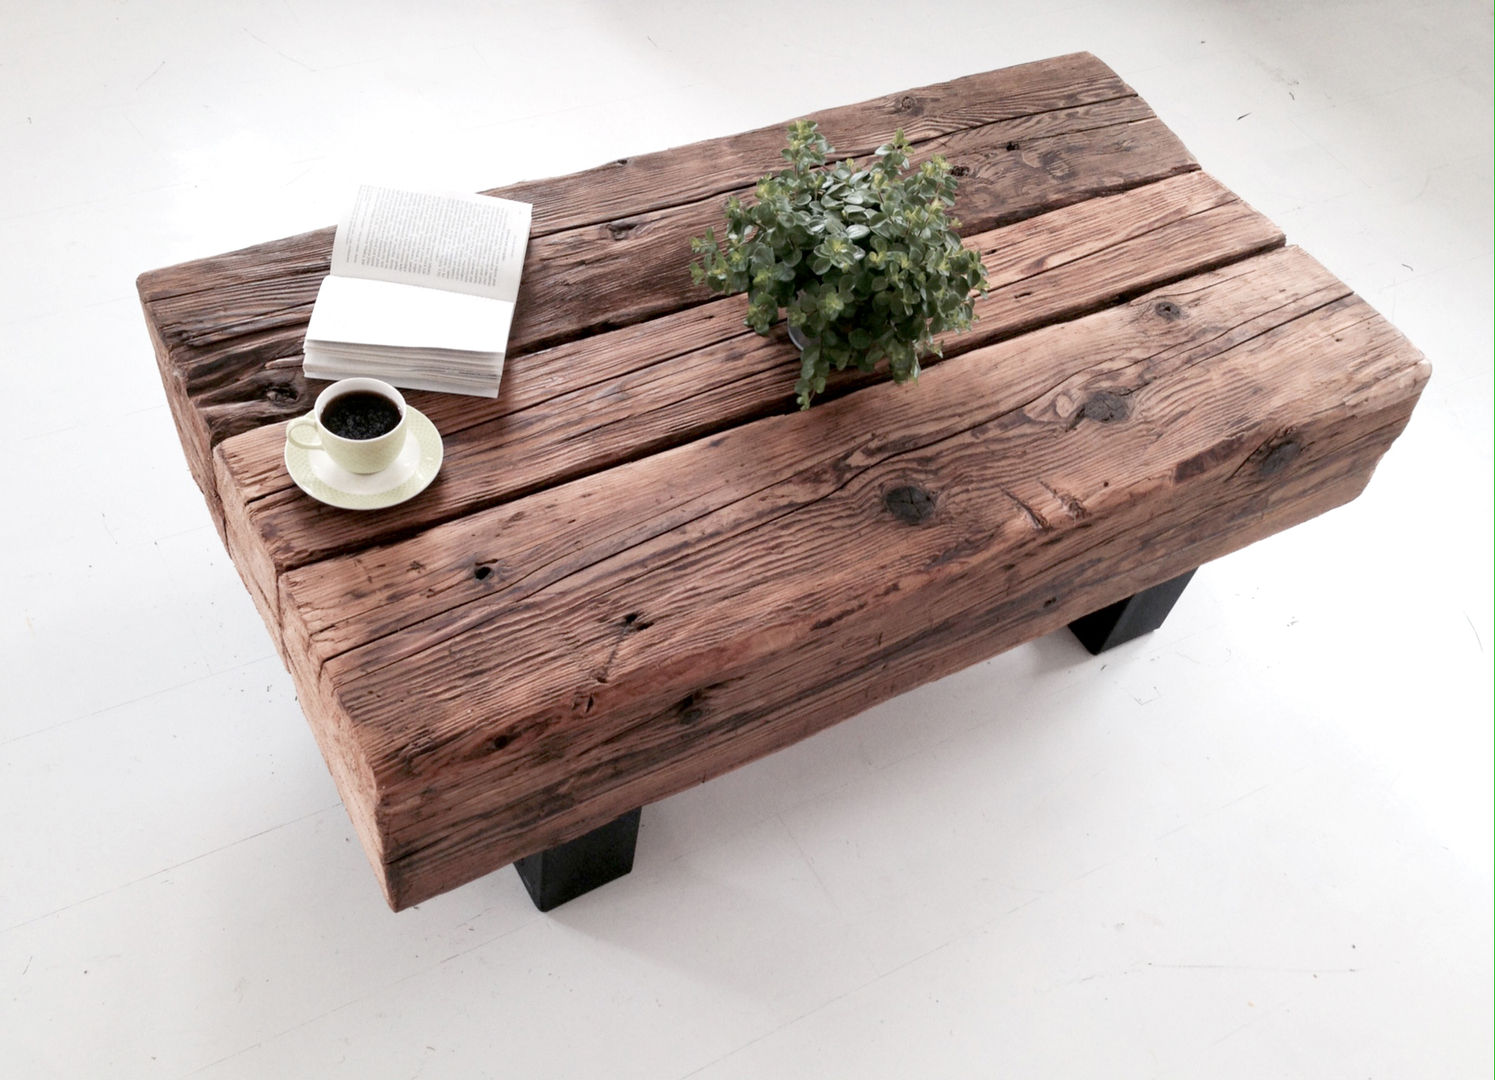 homify Industrial style living room Side tables & trays